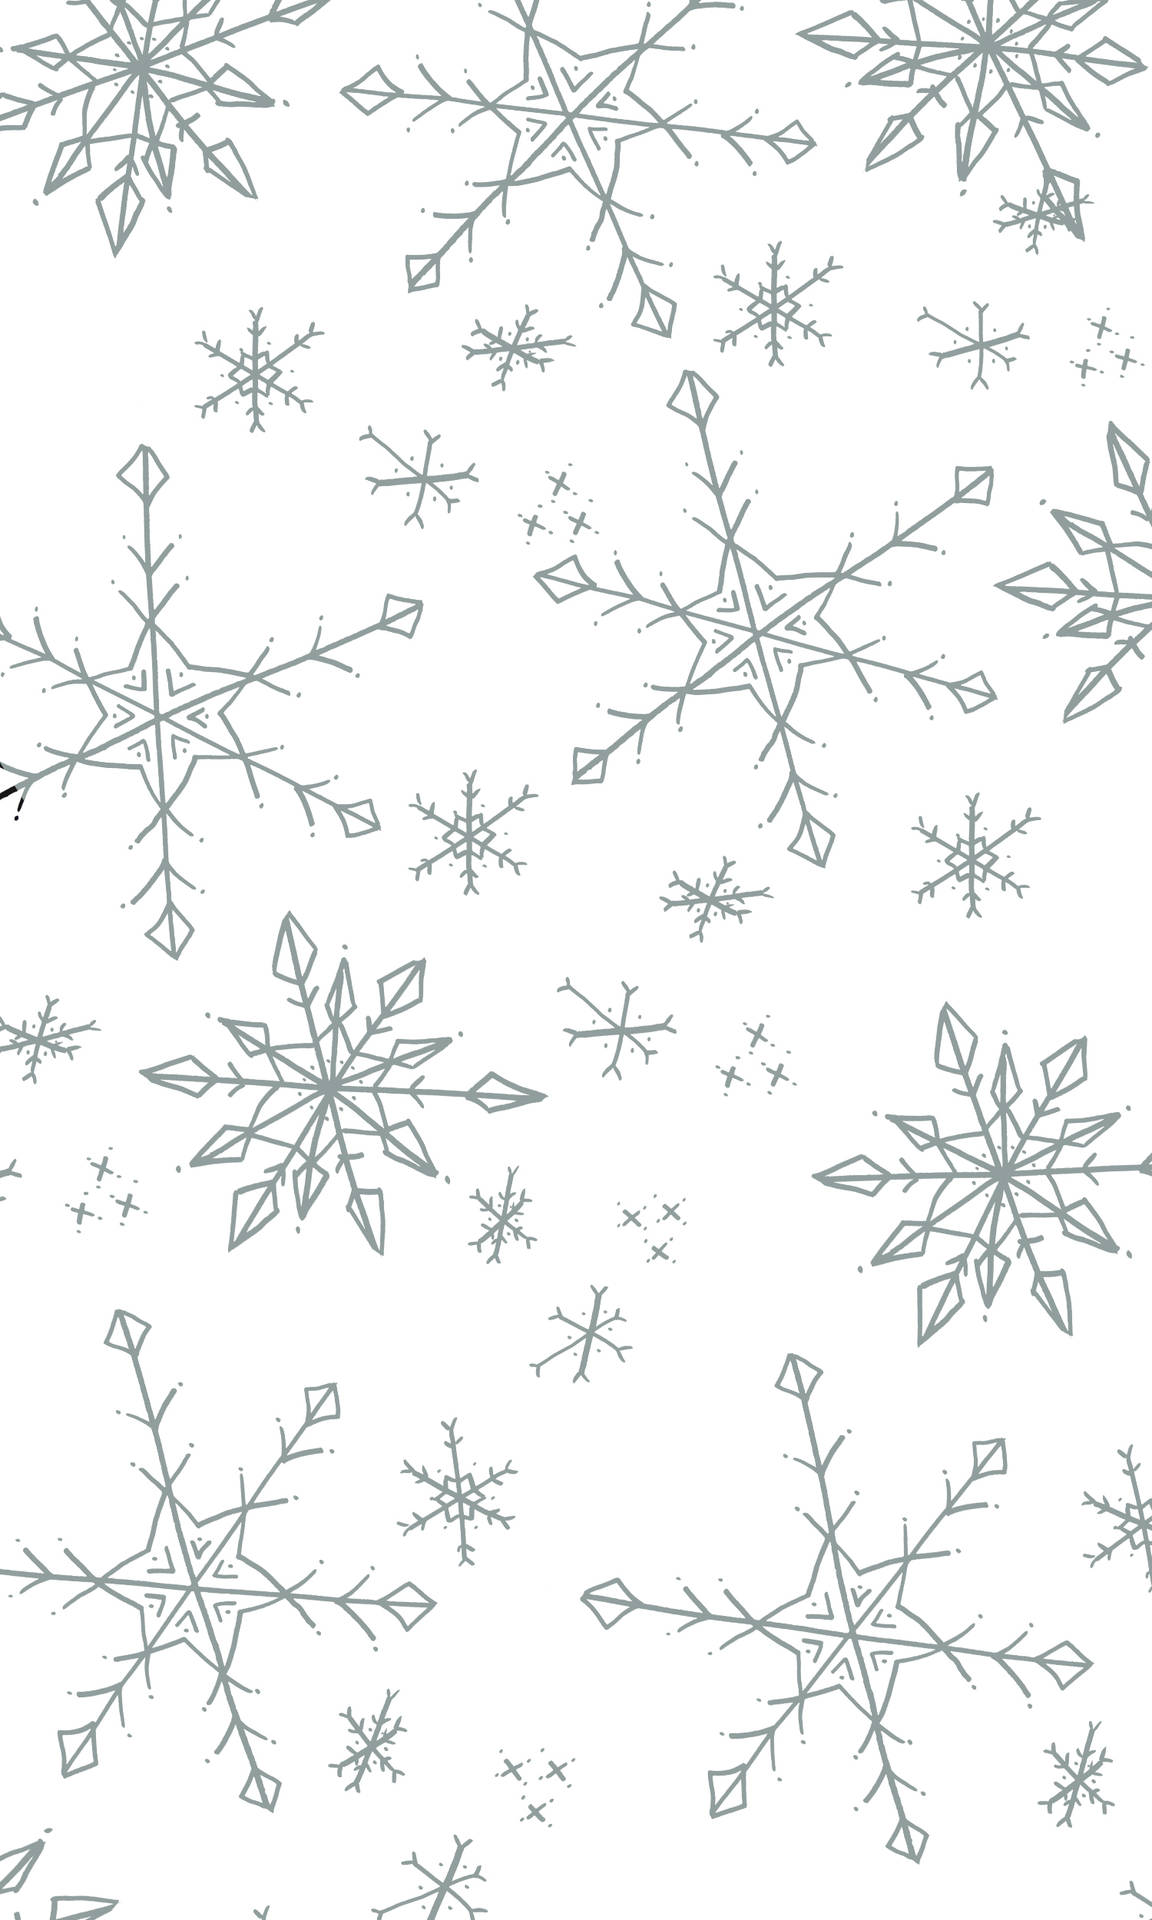 Enjoy the beauty of winter with our new Snowflake Iphone Wallpaper